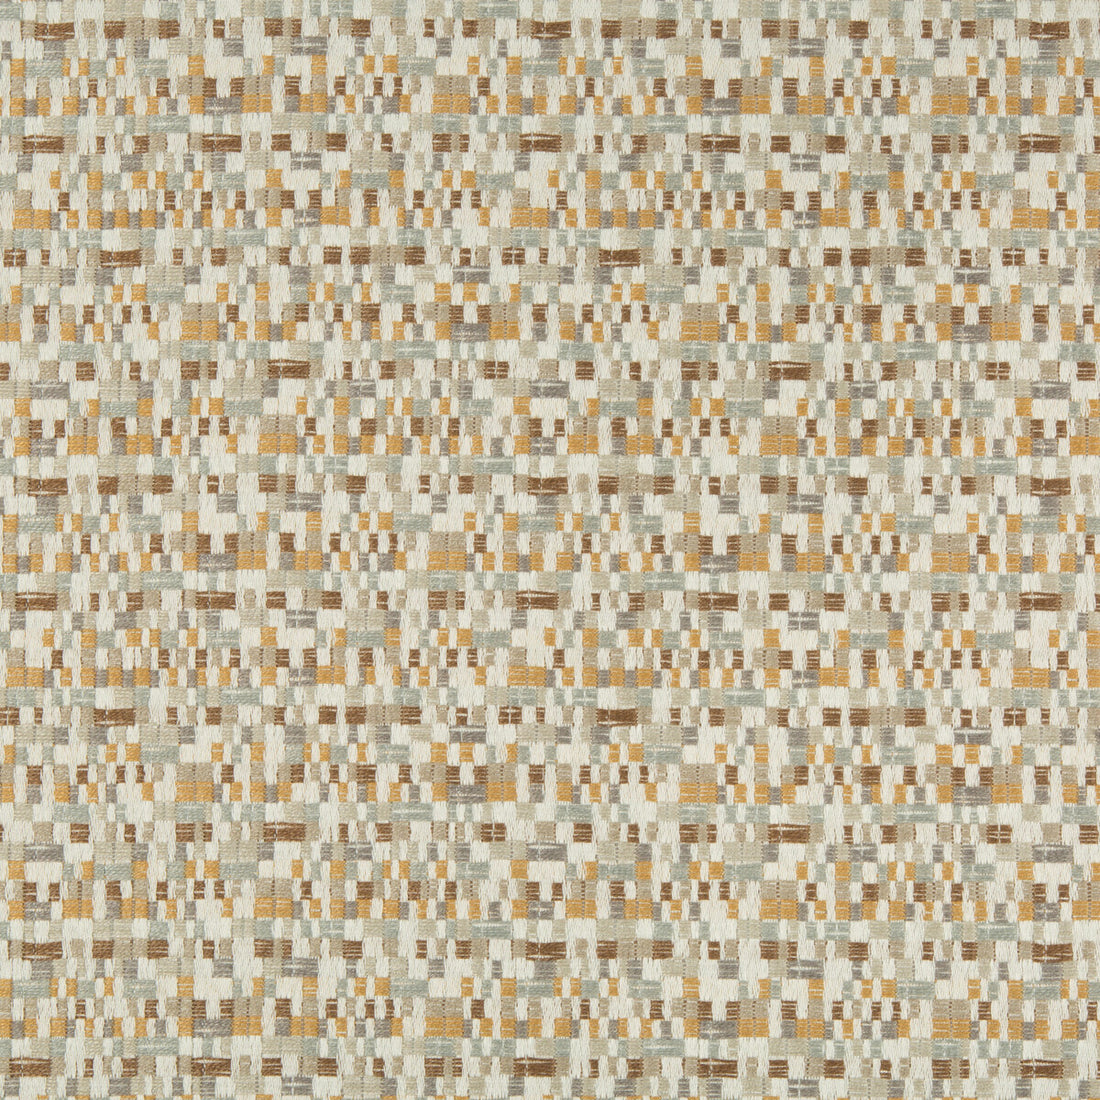 Kravet Contract fabric in 34736-611 color - pattern 34736.611.0 - by Kravet Contract in the Crypton Incase collection